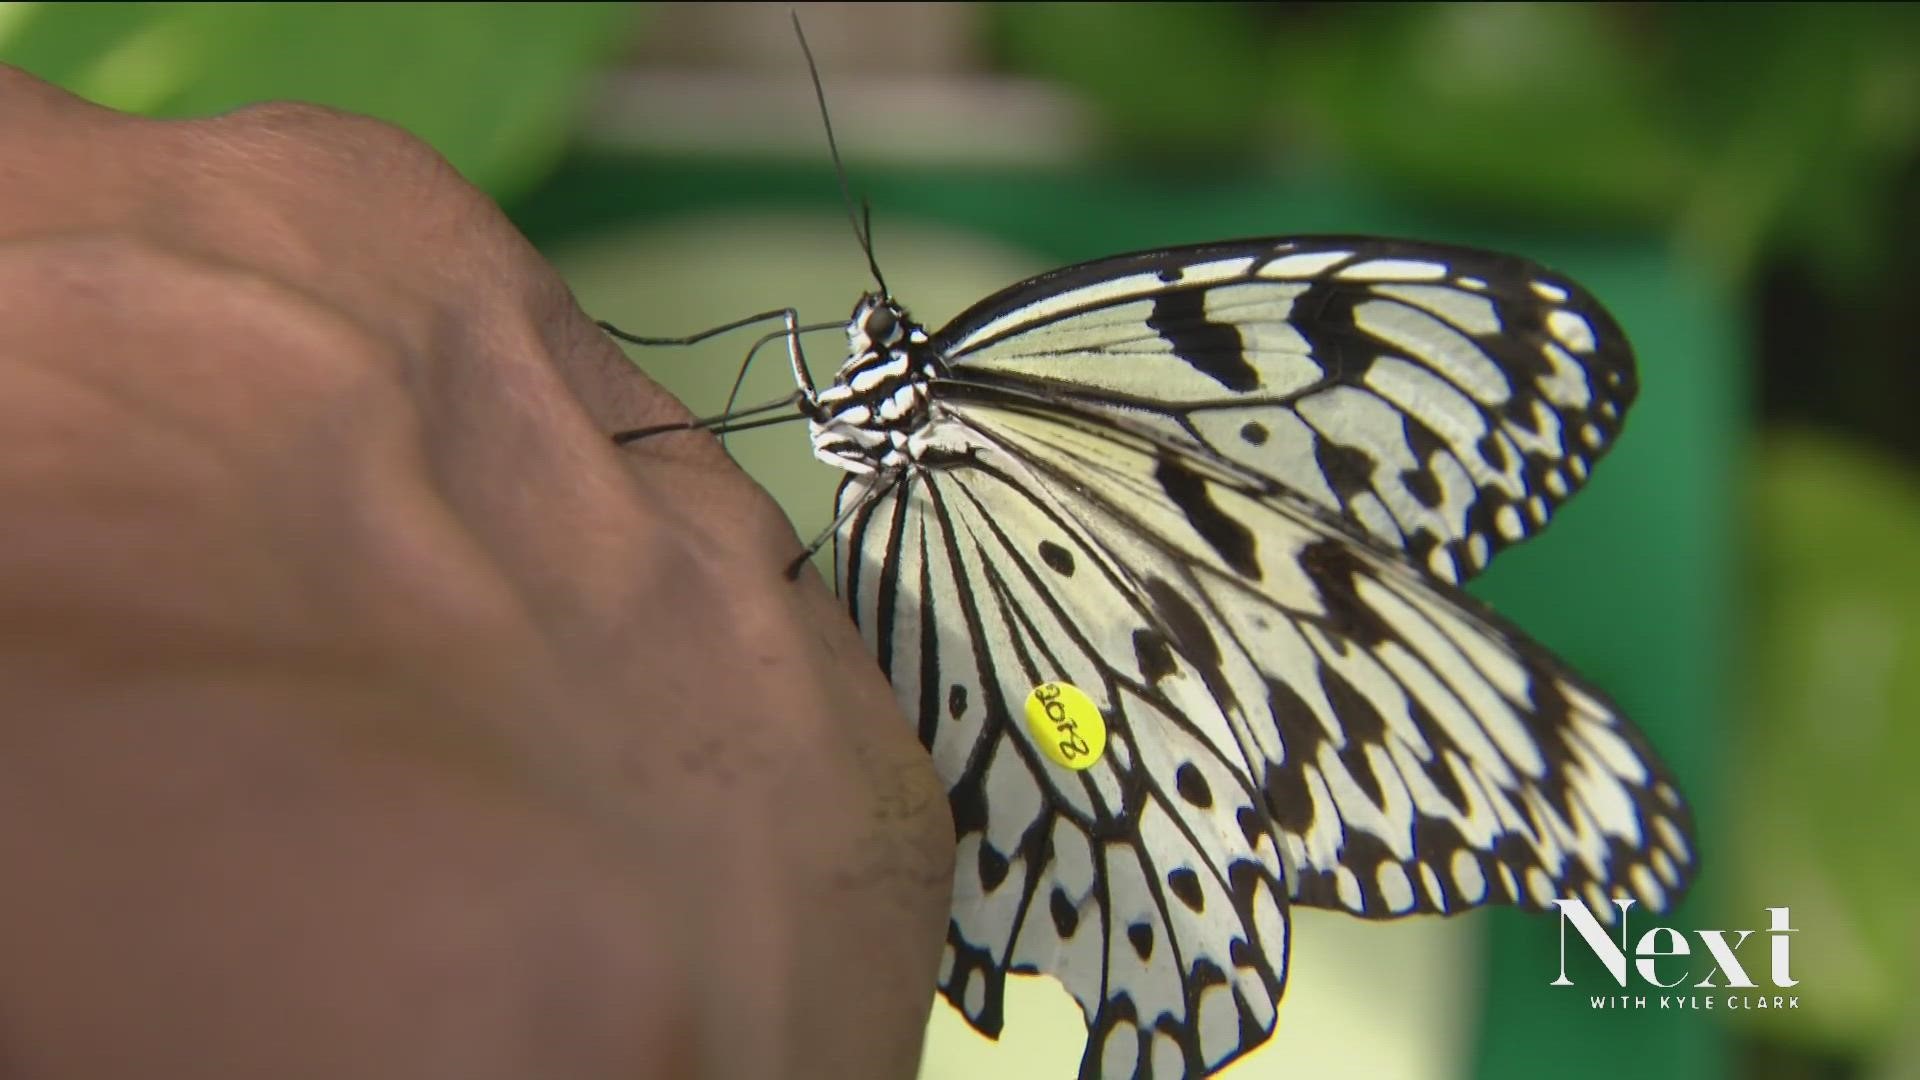 We stopped by the Butterfly Pavillion to see what good news was flying around.